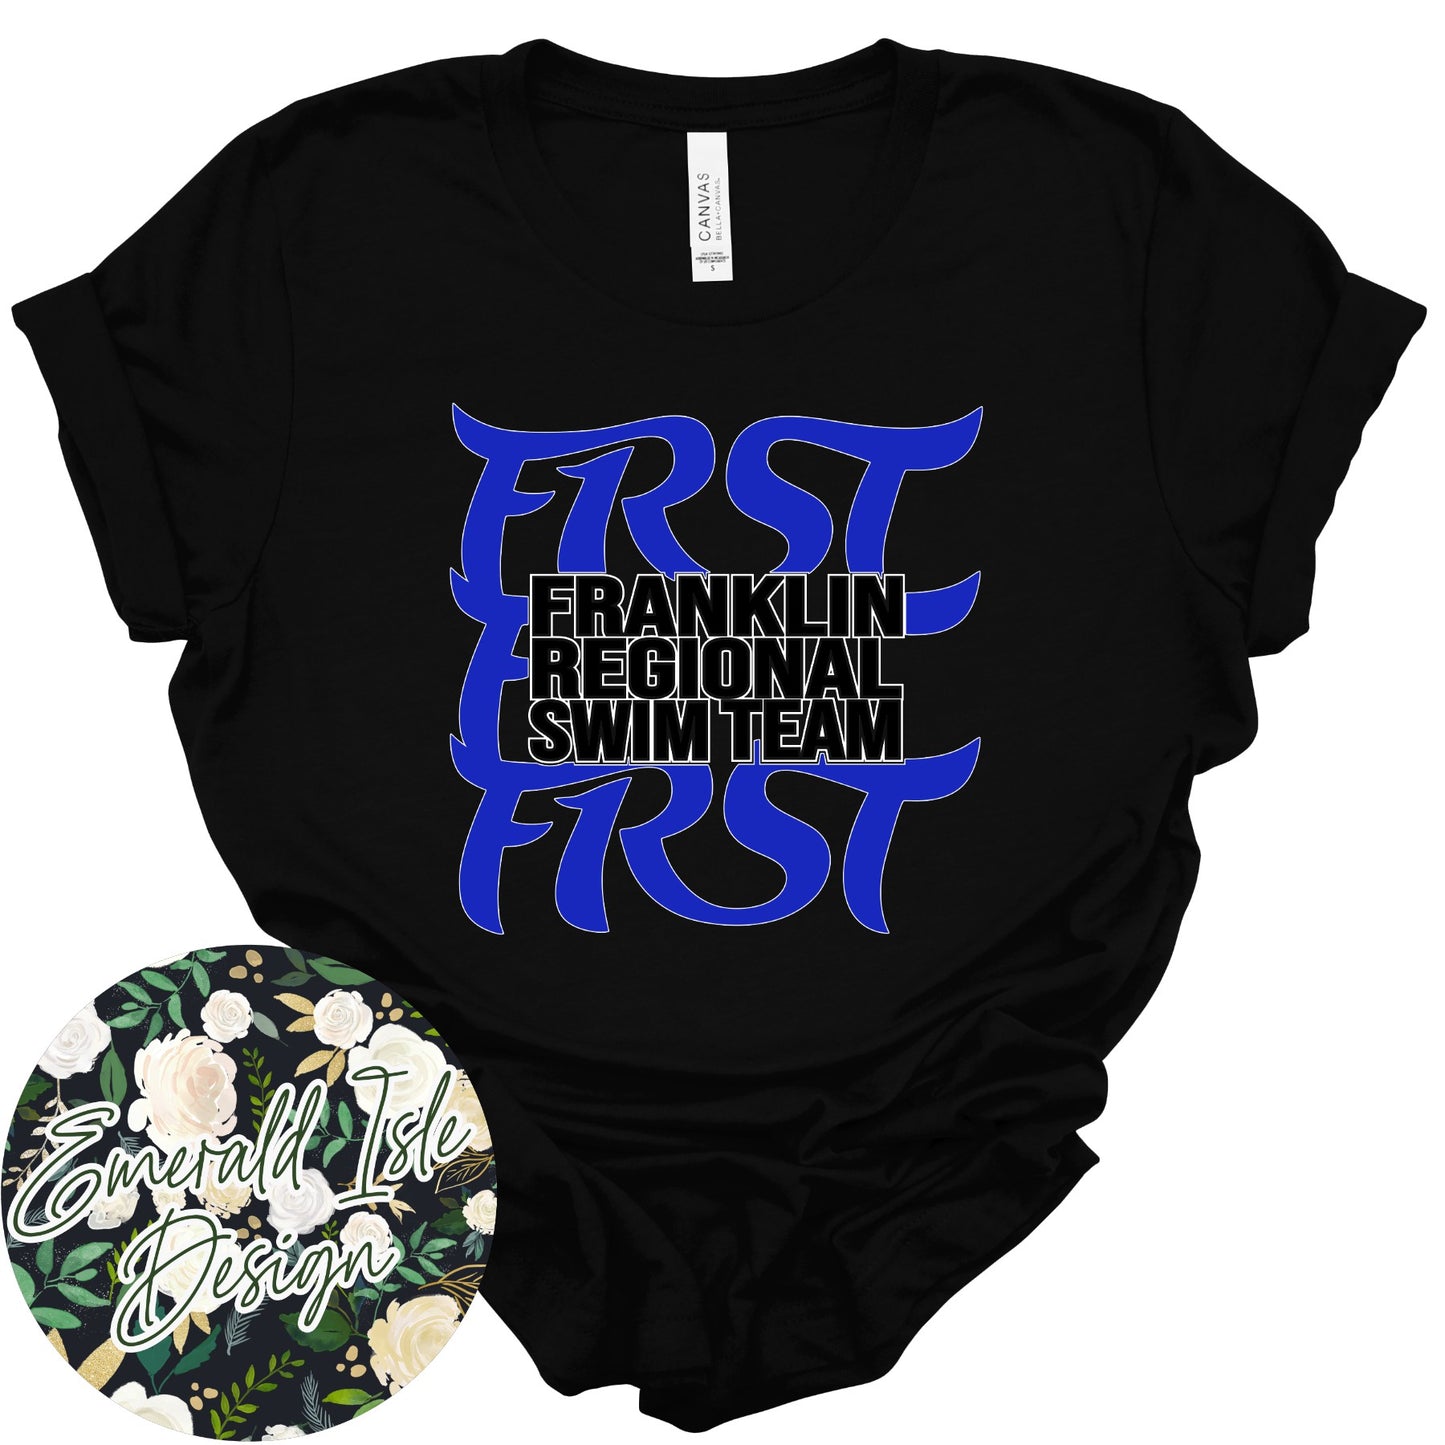 ADULT SIZES Stacked FRST Design